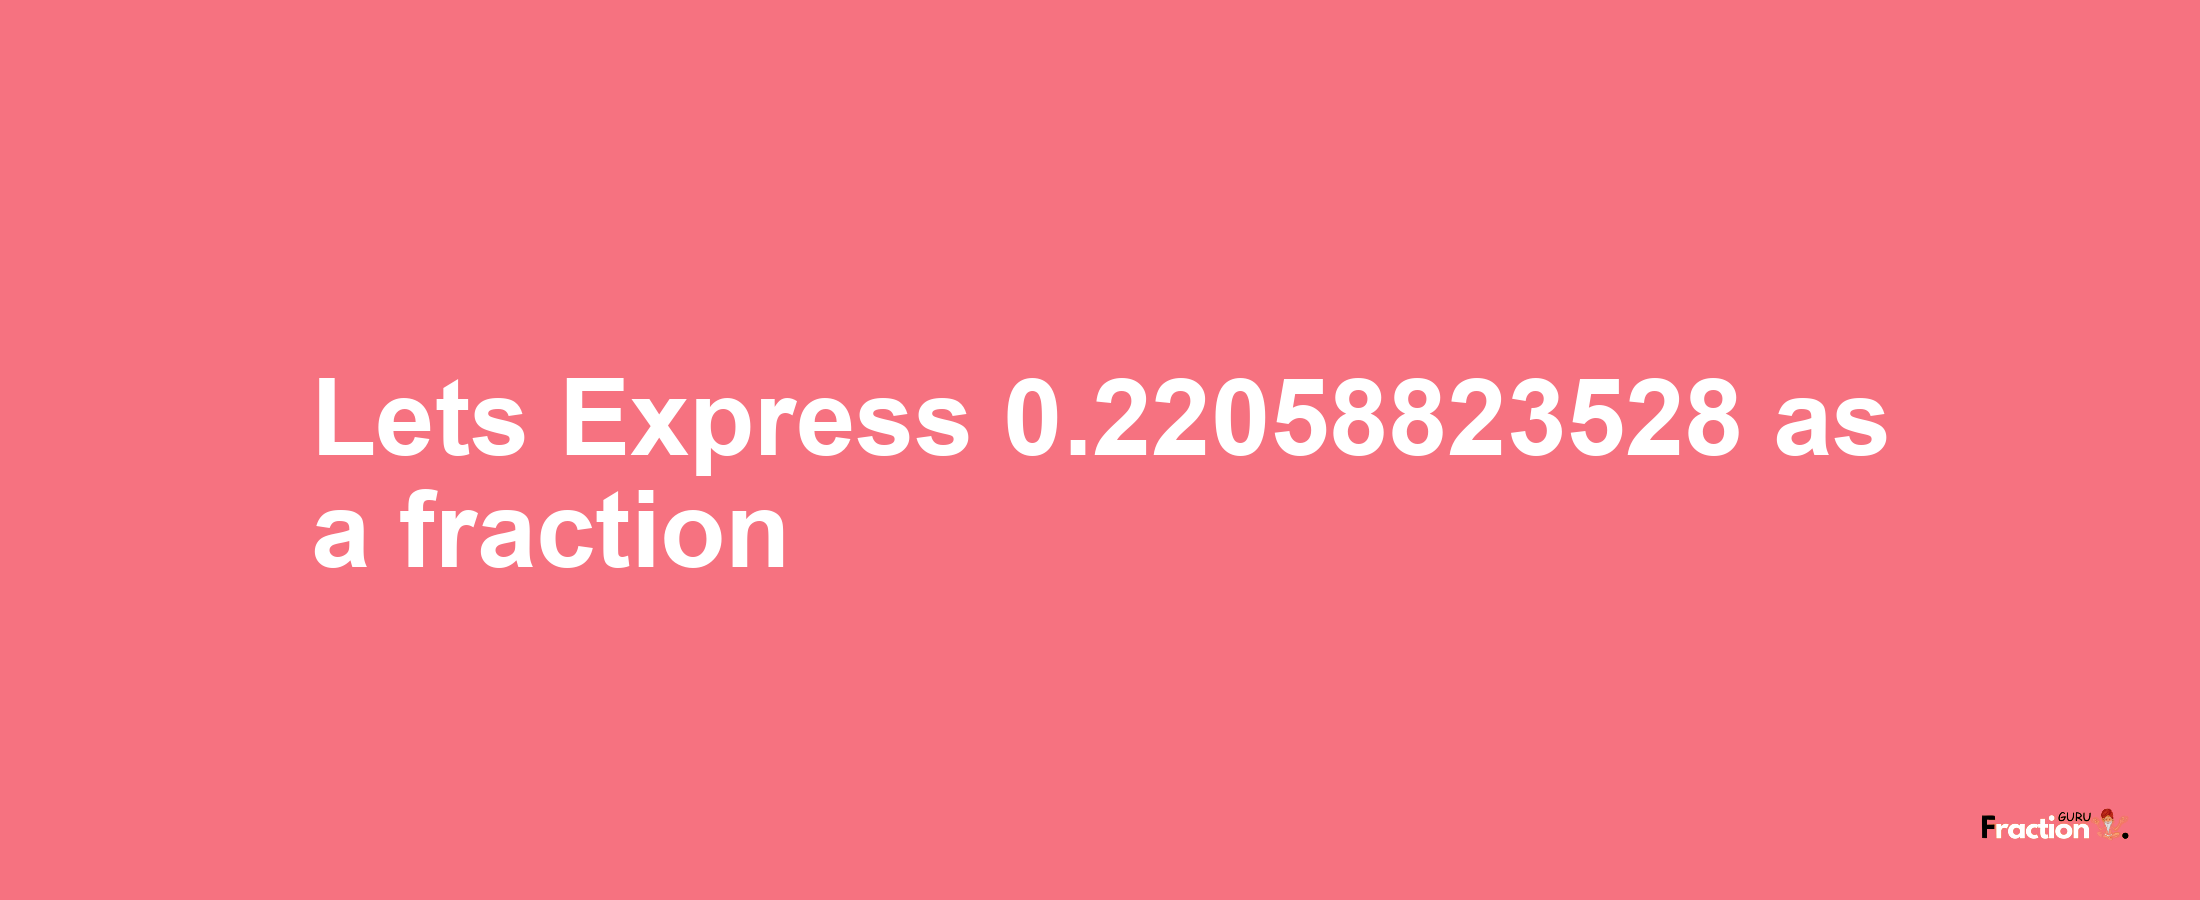 Lets Express 0.22058823528 as afraction